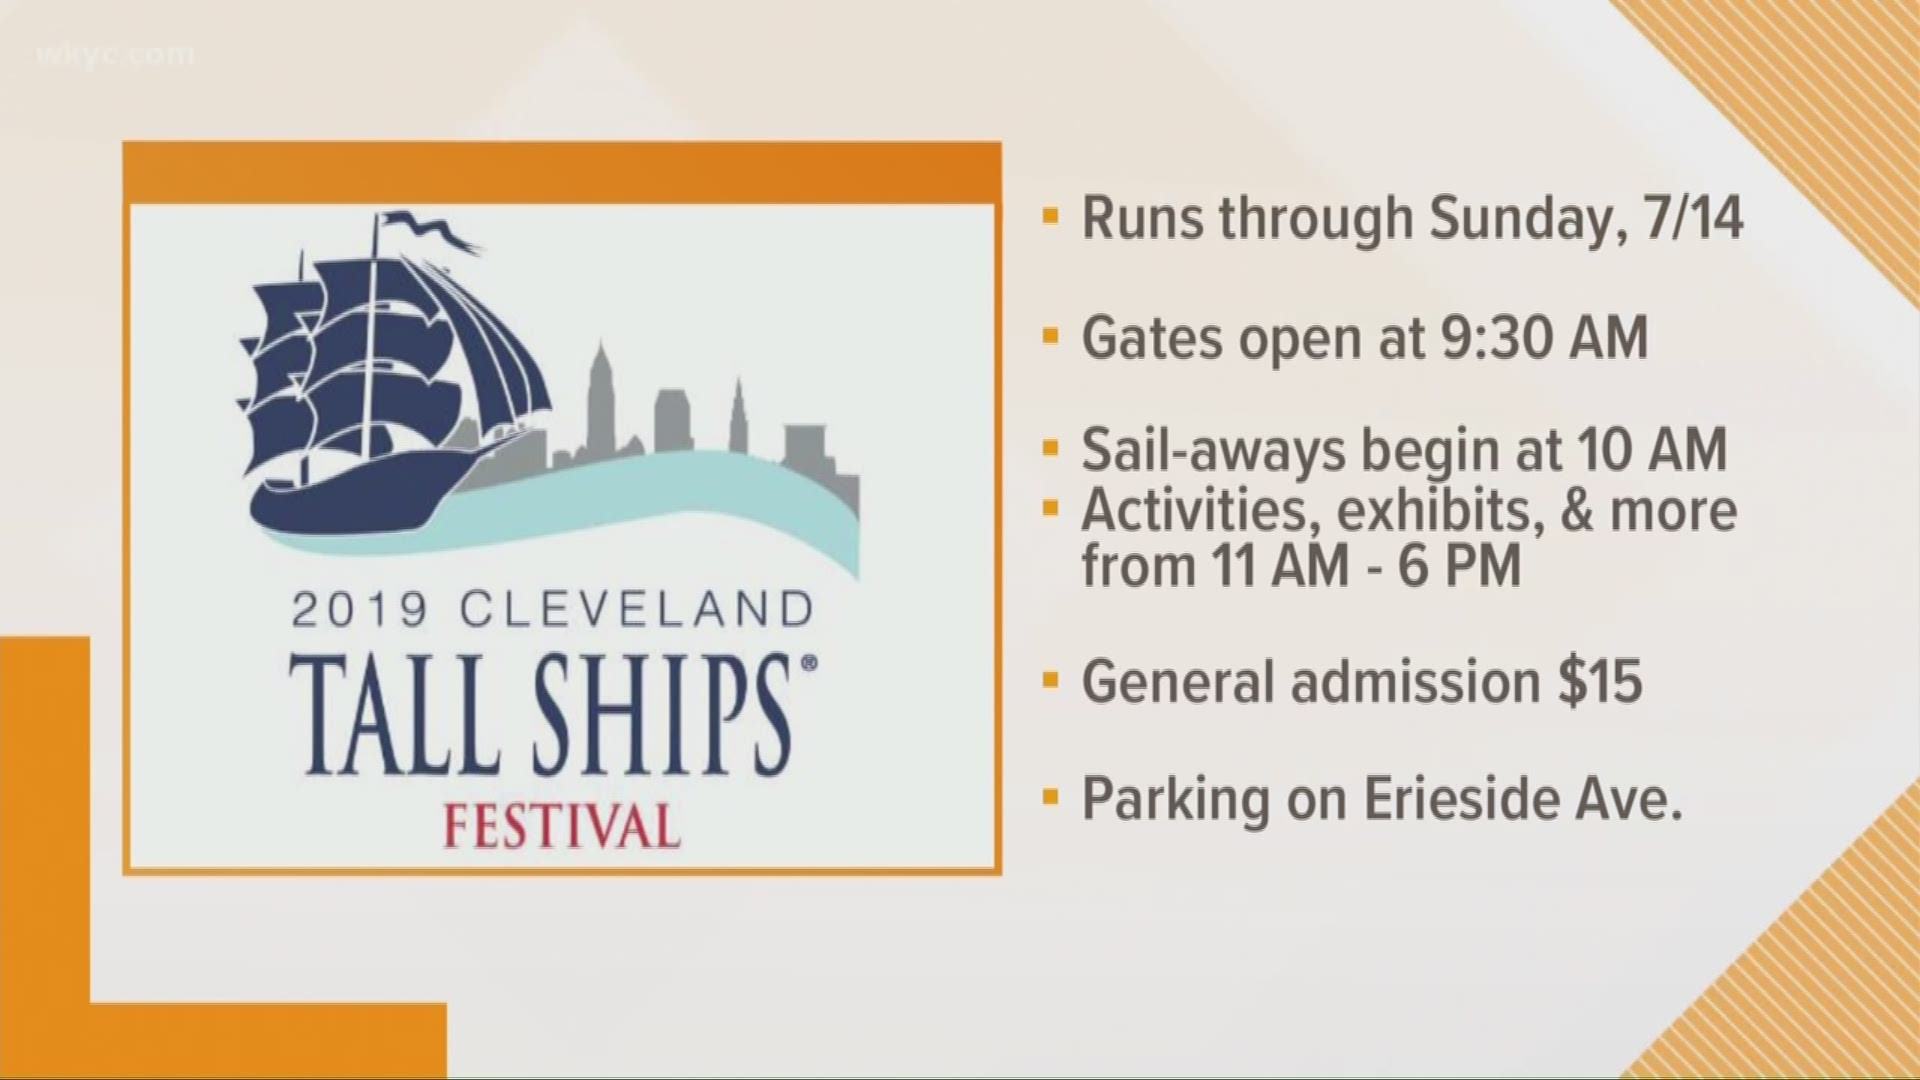 The Tall Ships Festival begins today.